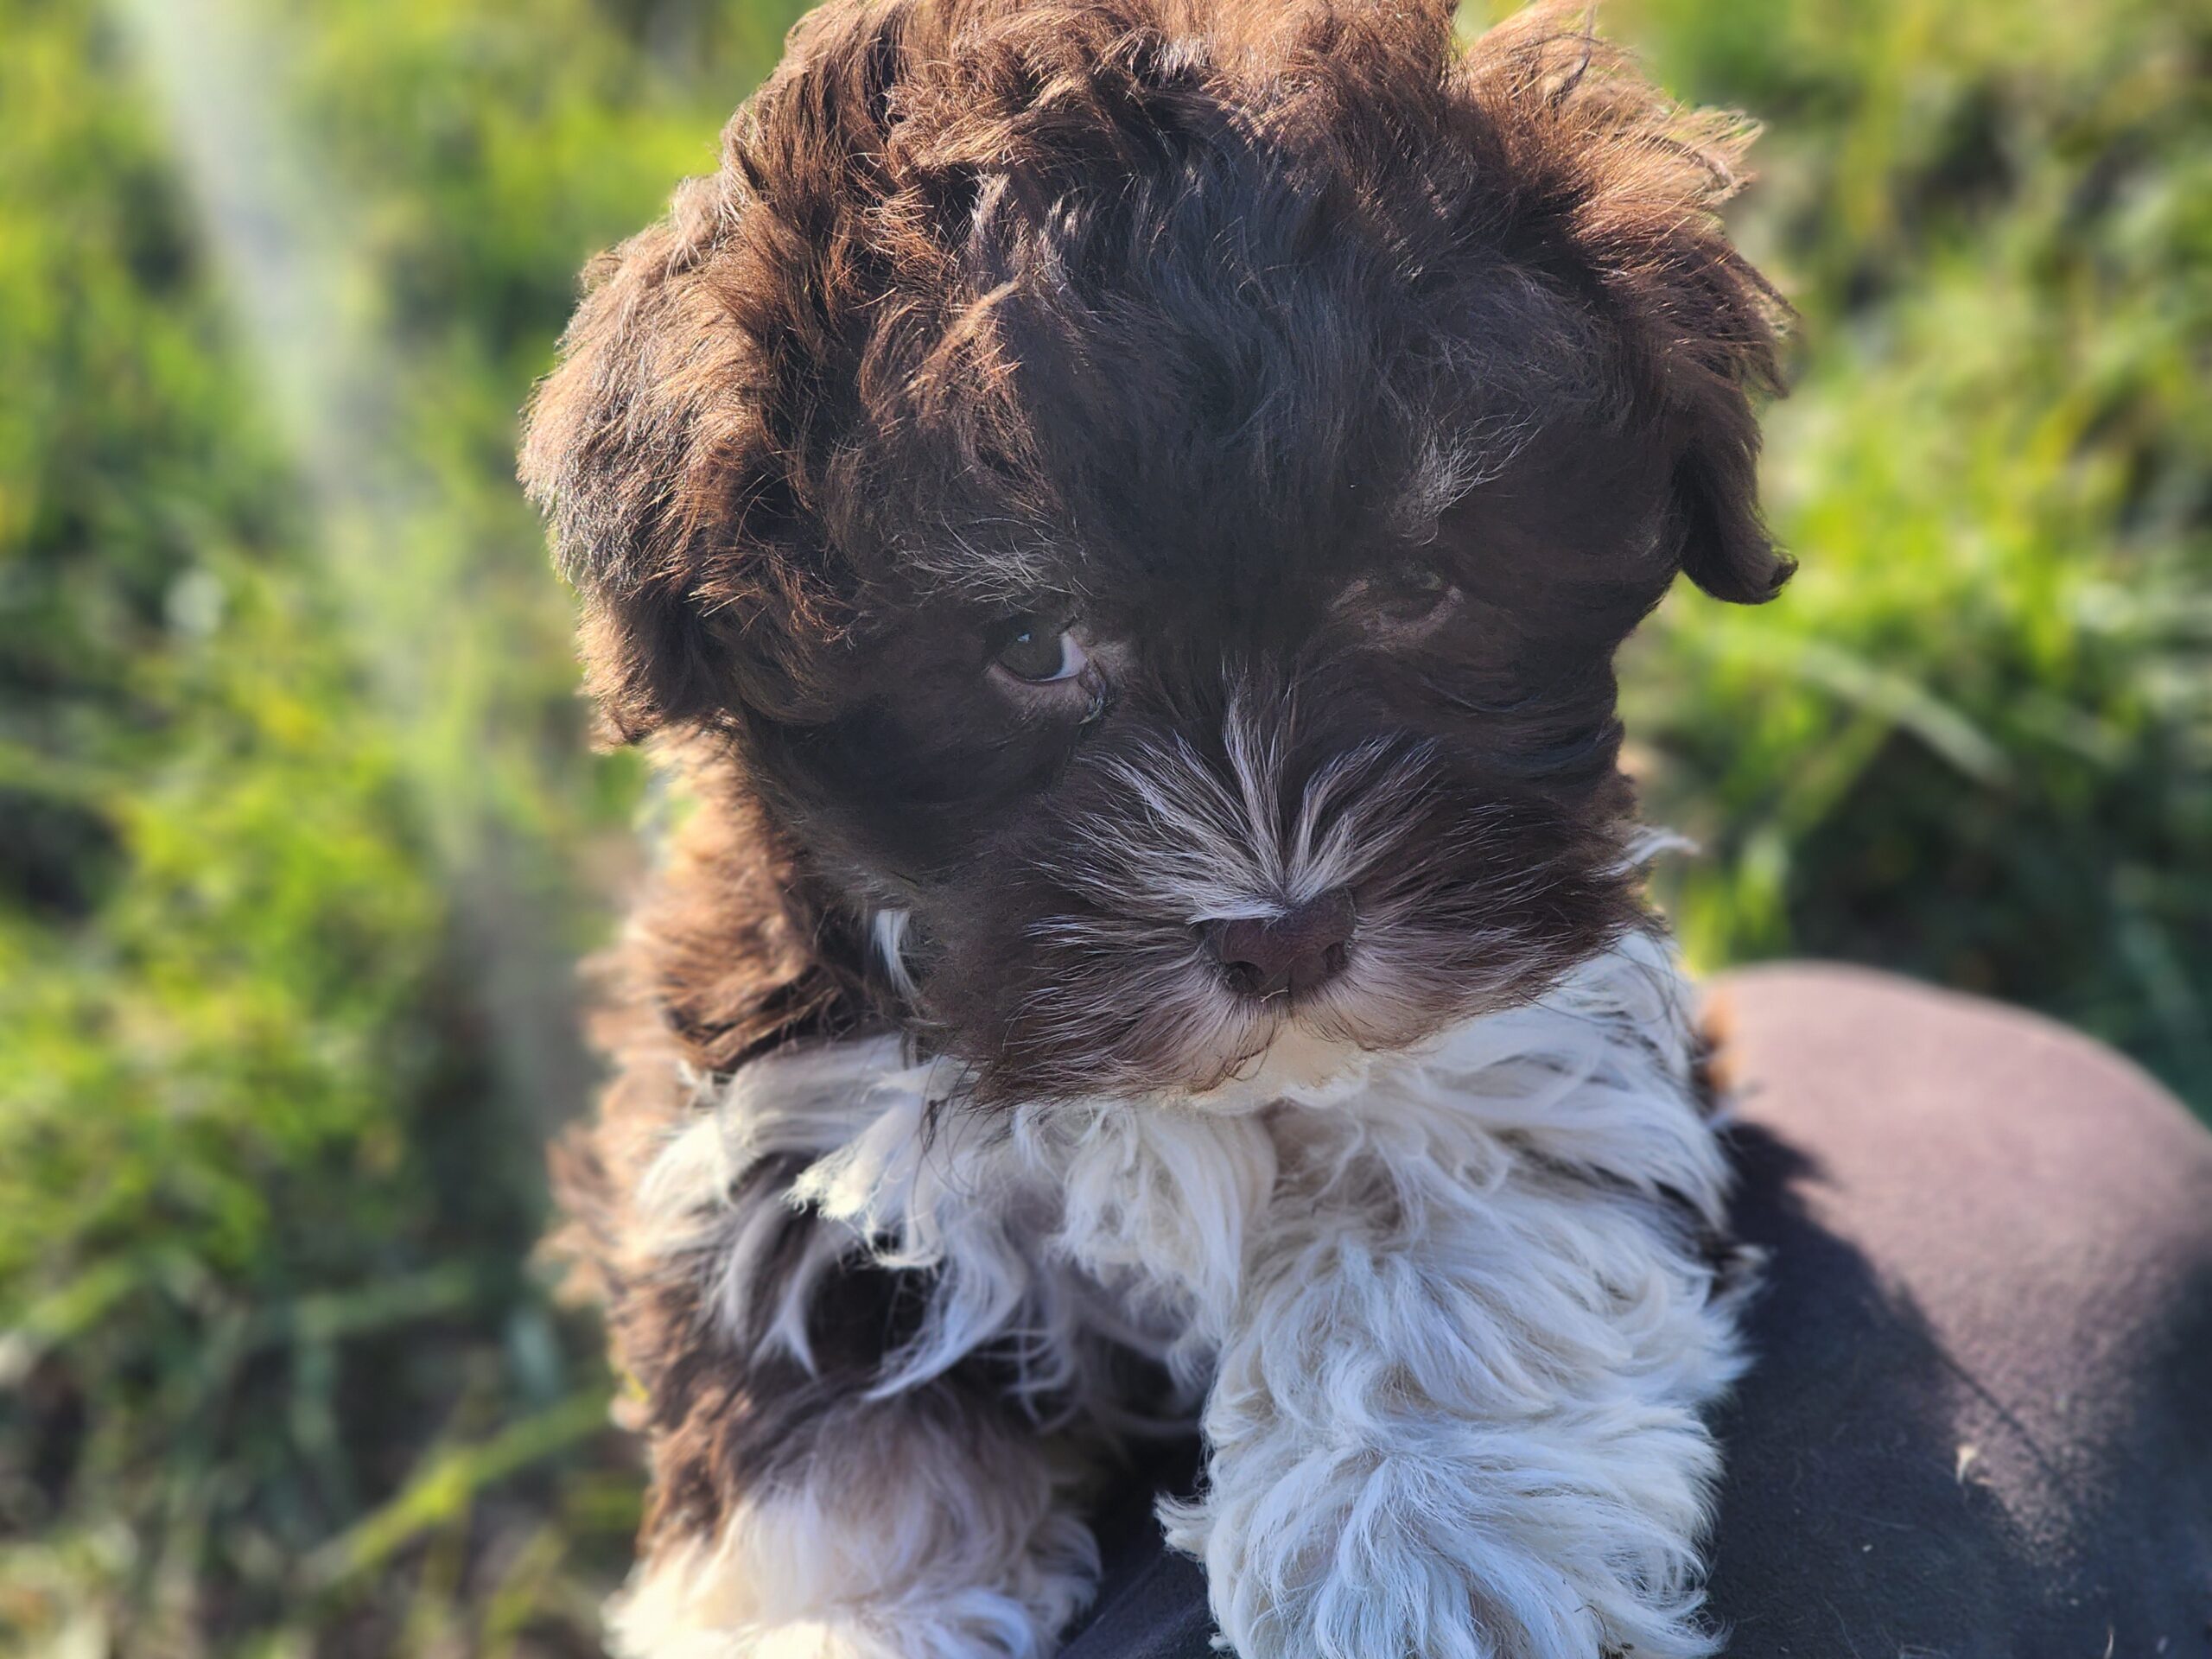 "Ms. Mazie" DOB: 9/11/23. Breed: Havanese. Color: Chocolate and White. Sex: Female. Available Now. Price: $1800